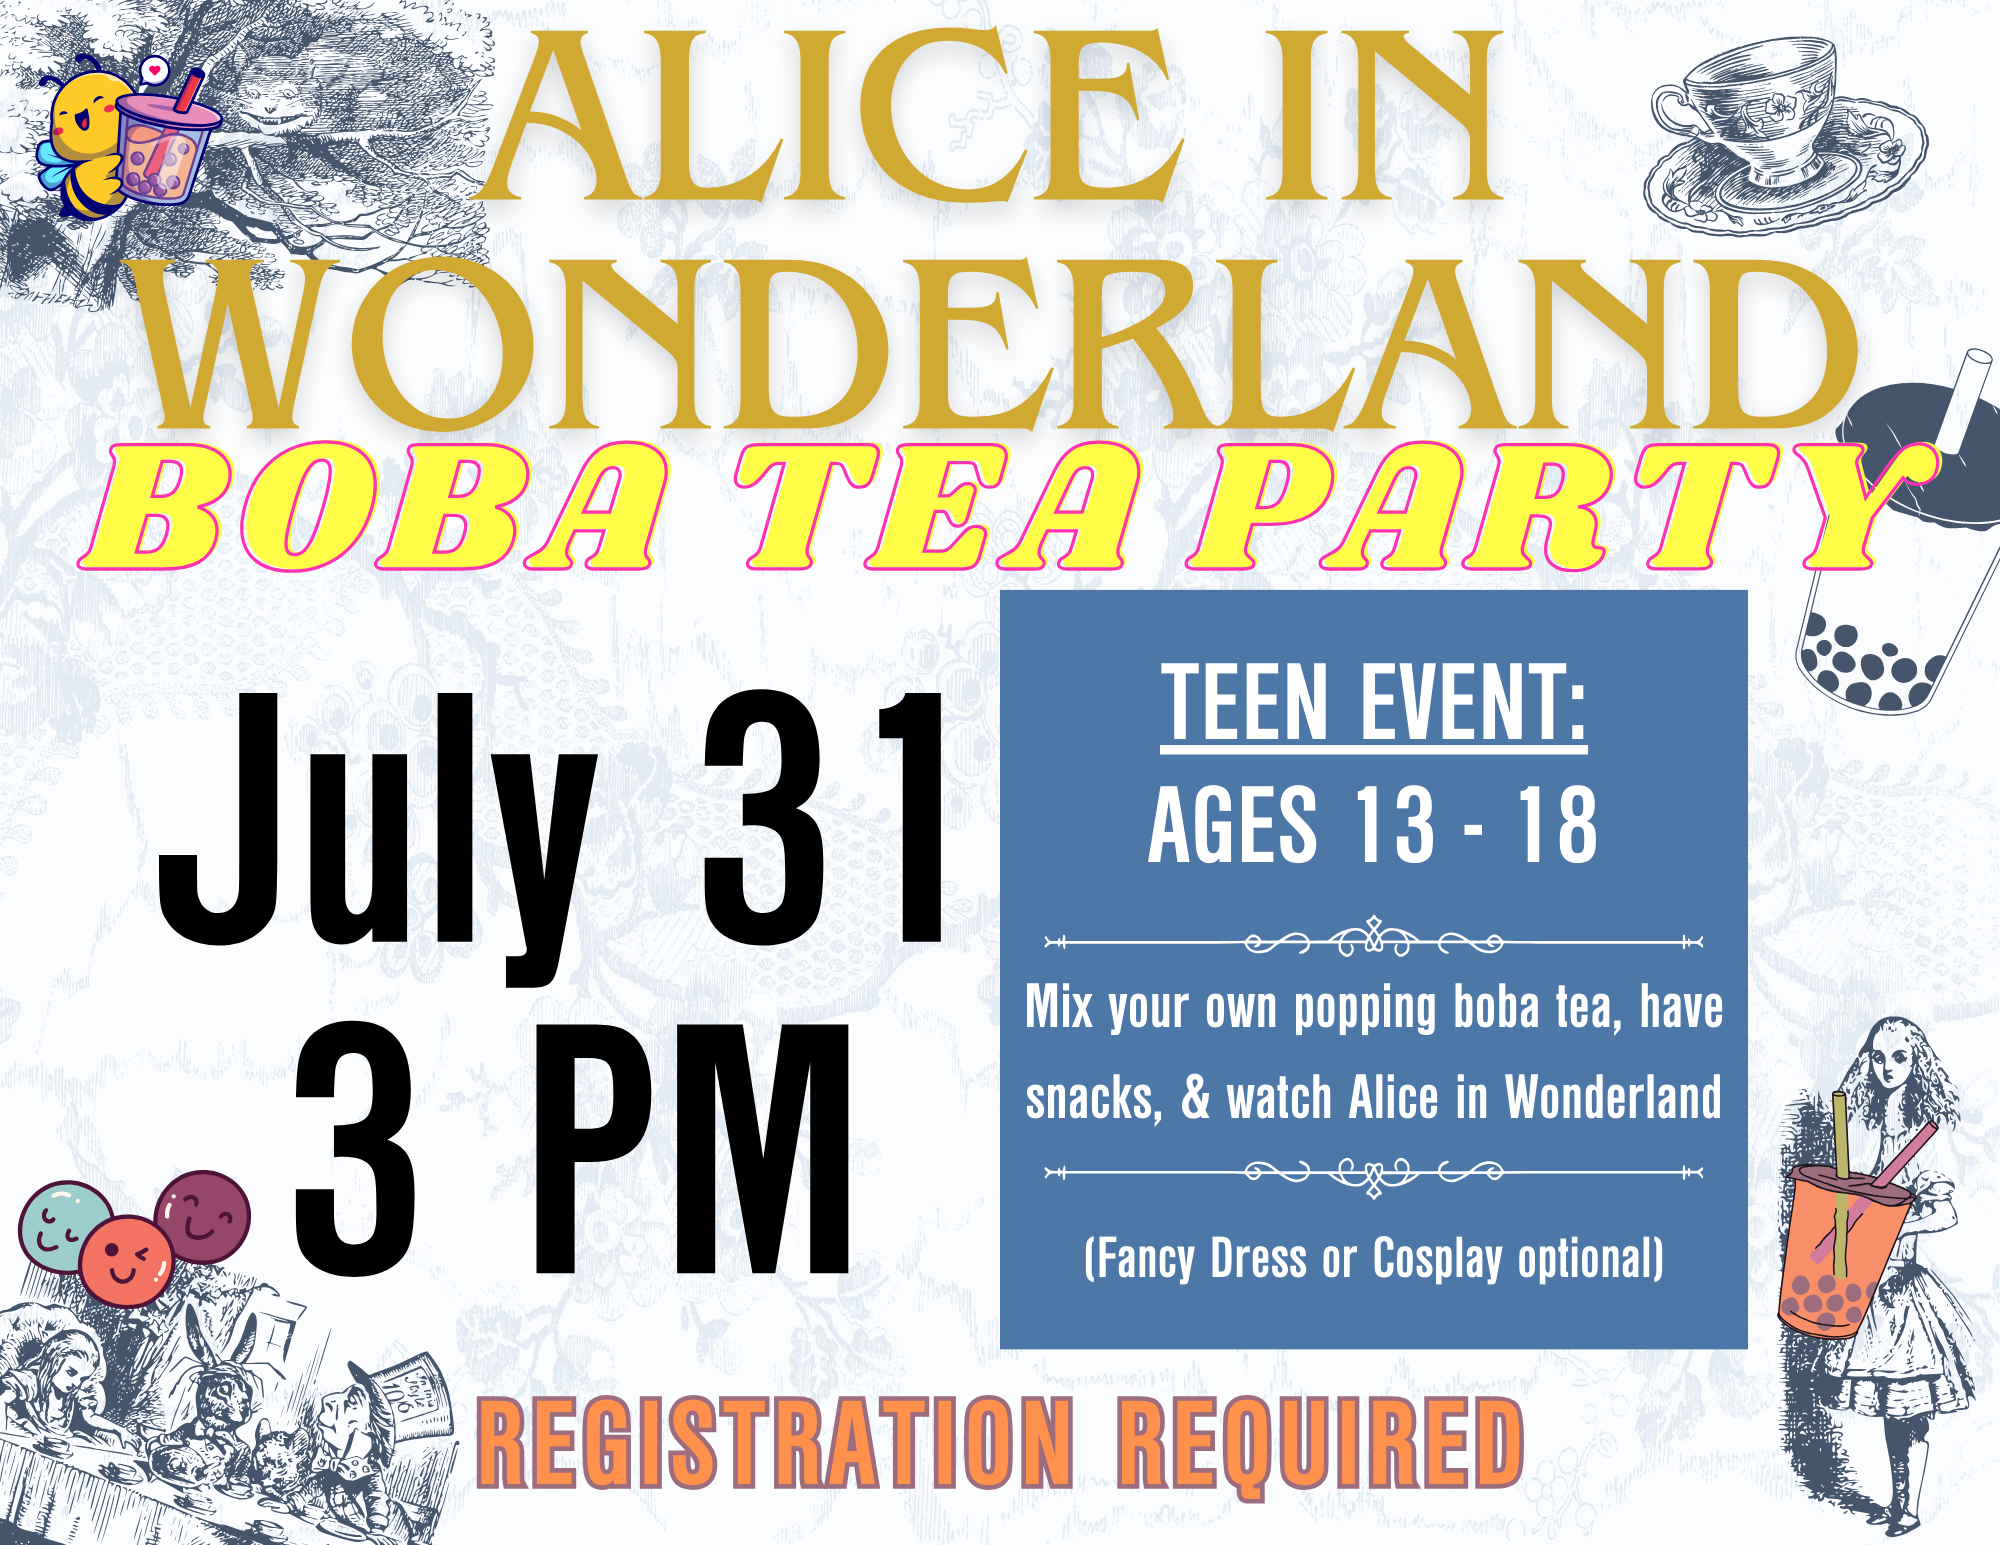 Alice in Wonderland Boba Tea Party July 31st 3 PM Teen Event: Ages 13-18) Mix your own popping boba tea, have snacks, and watch Alice in Wonderland! Fancy dress or cosplay optional *REGISTRATION REQUIRED*